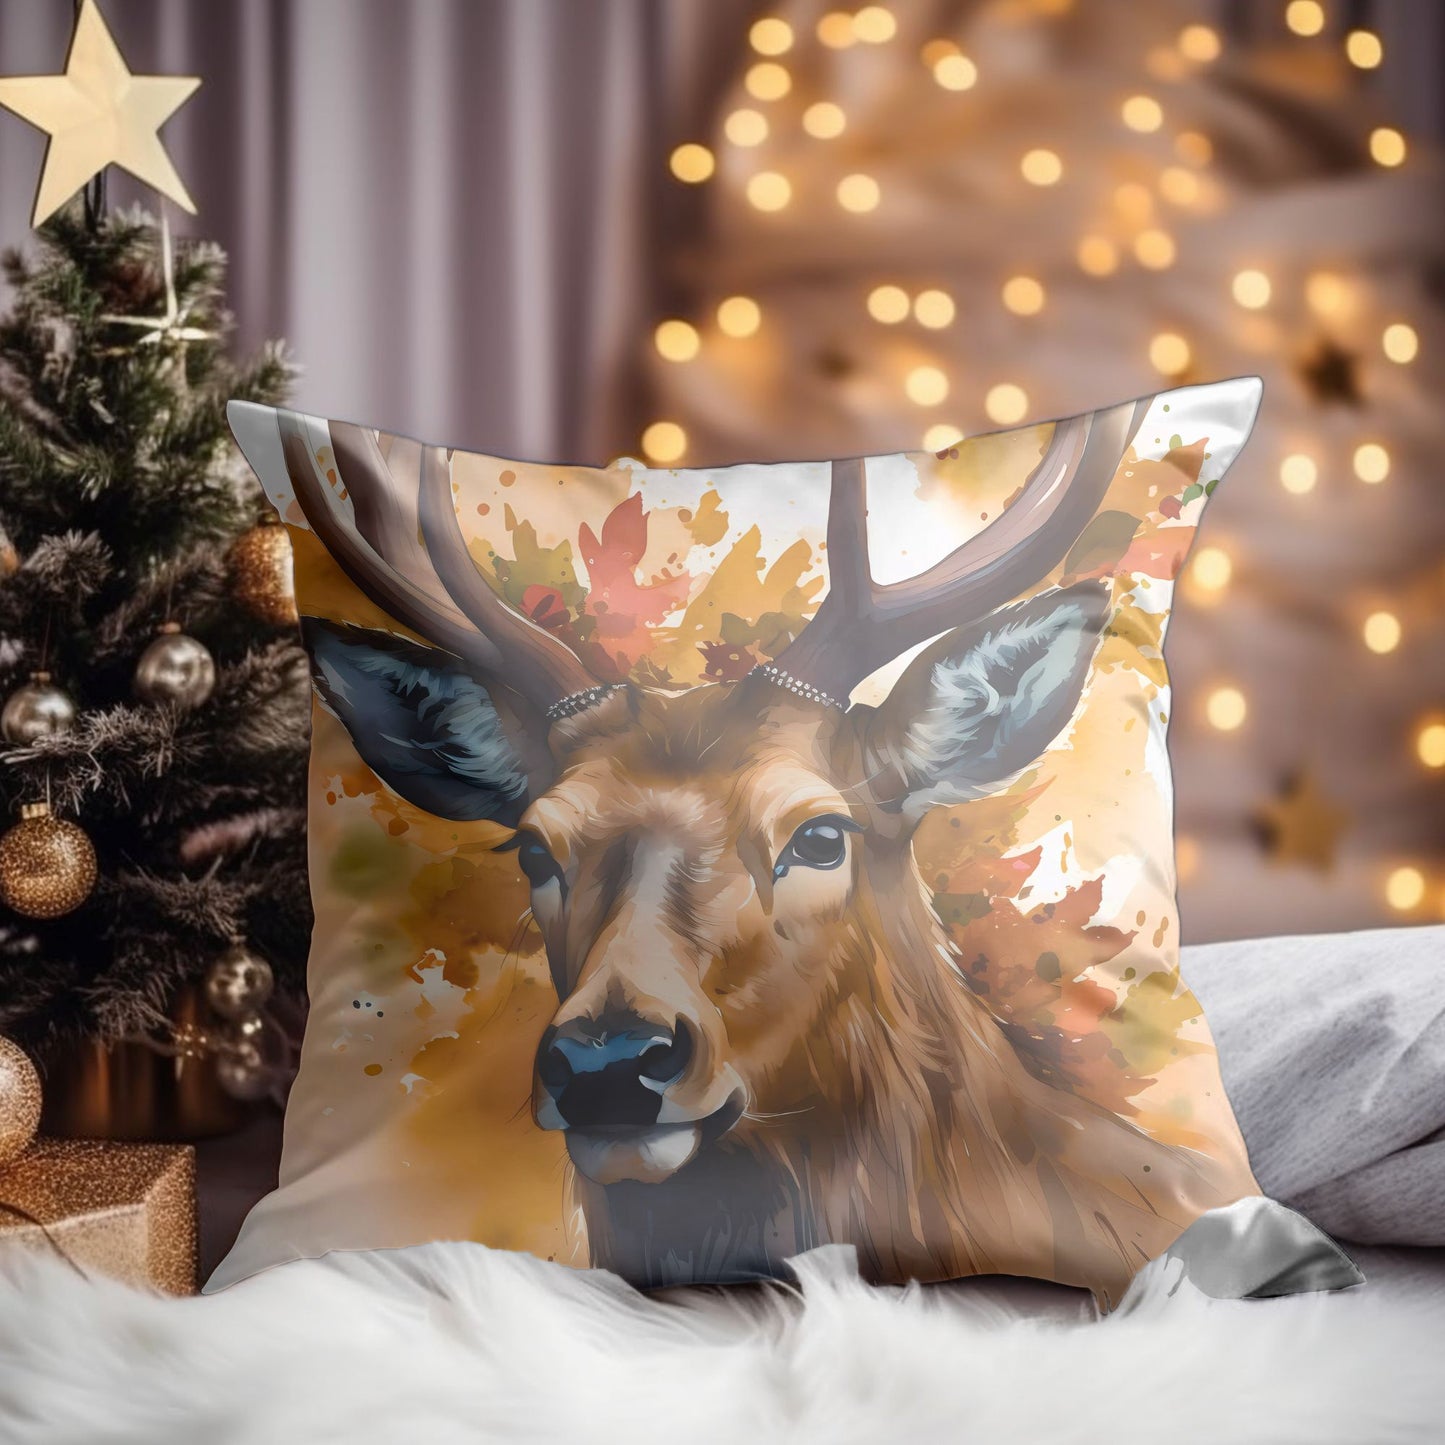 Festive Holiday Decorative Pillow with Reindeer Design